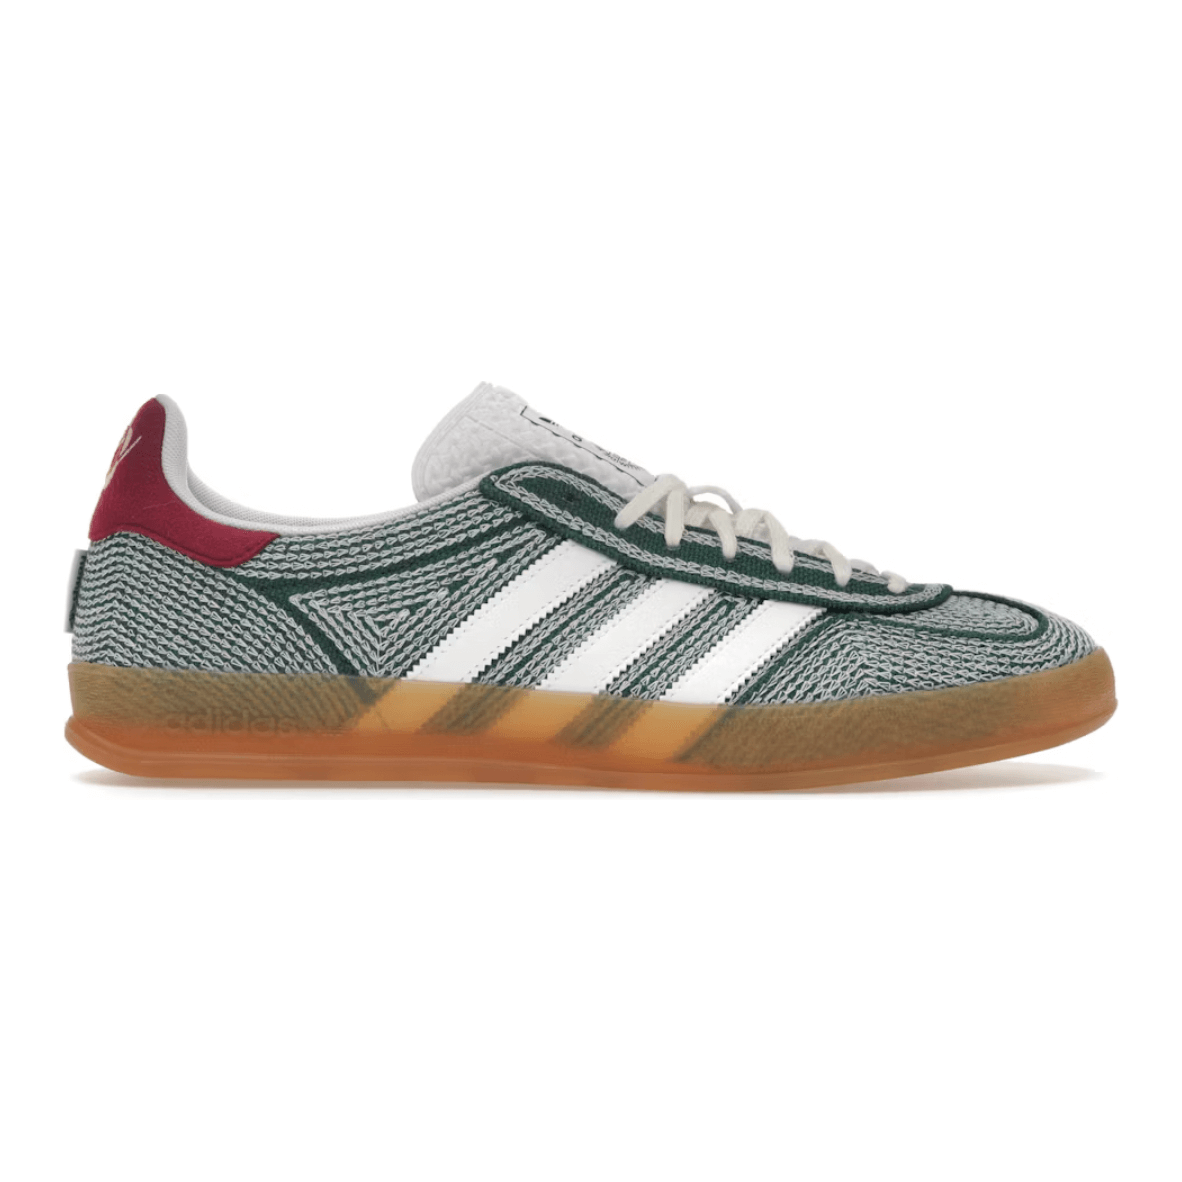 Adidas Gazelle Indoor Sean Wotherspoon Hemp Green by Adidas from £185.00